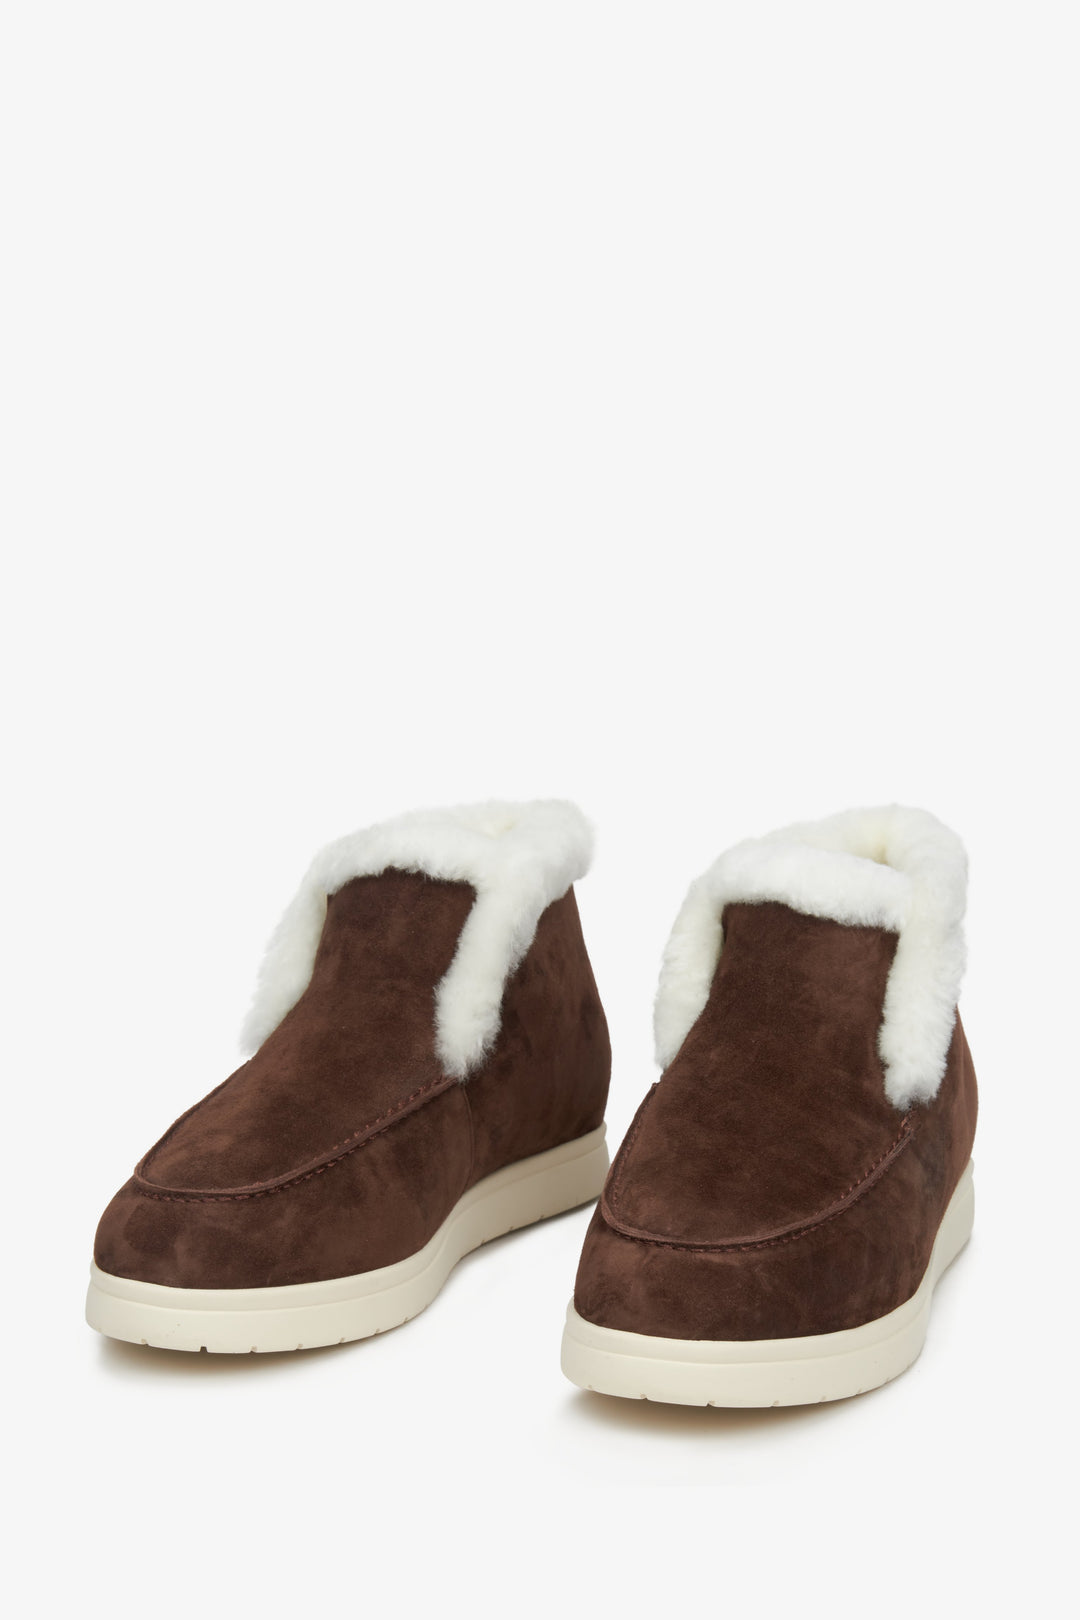 Winter women's moccasins in brown velour and natural leather by Estro - front part of the shoe.